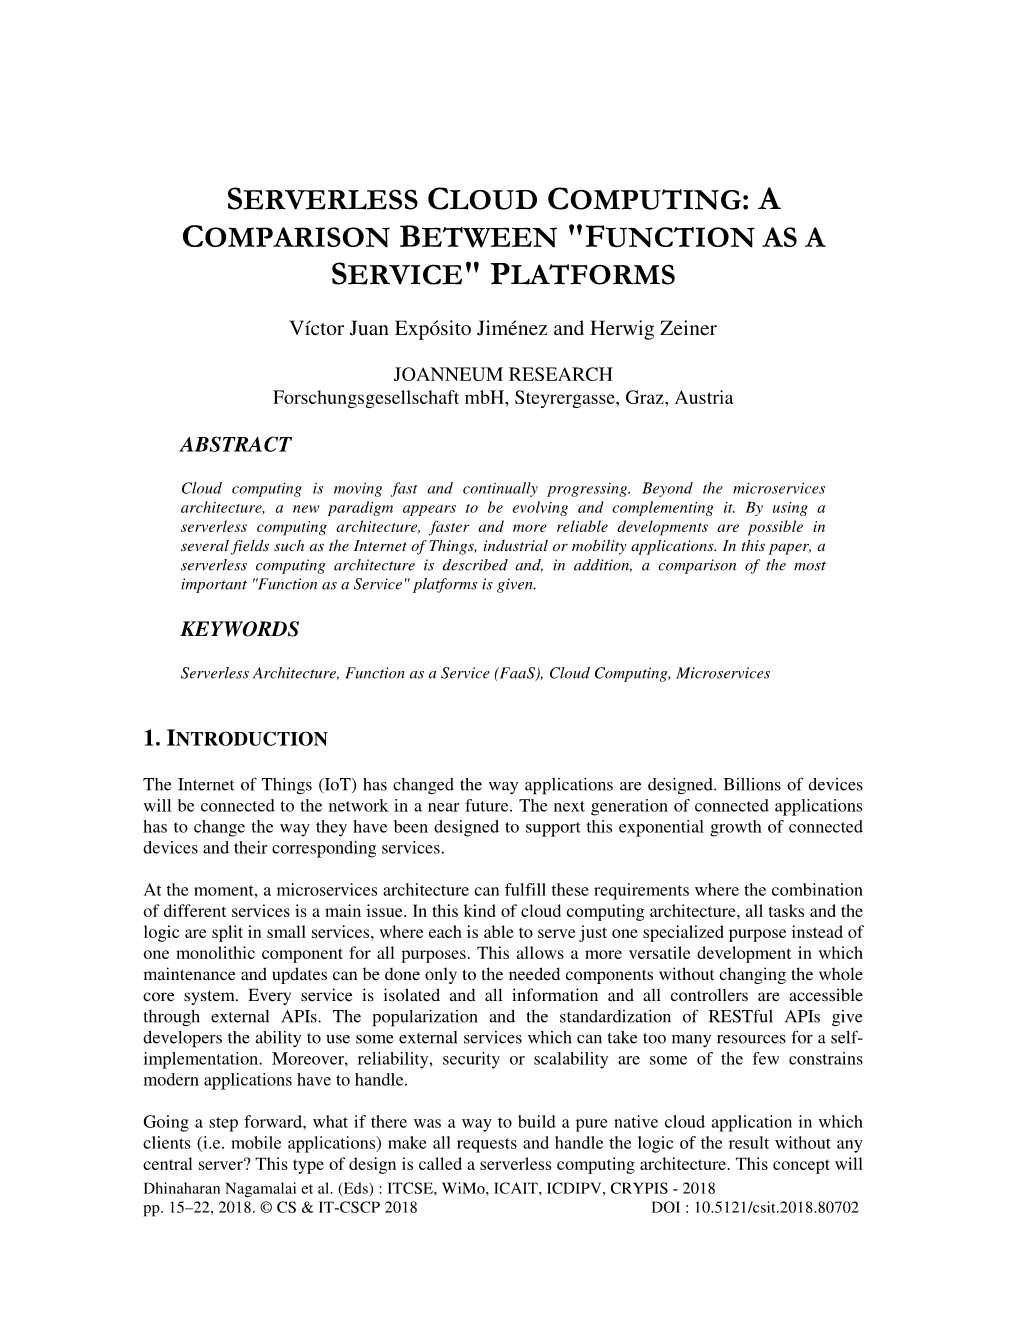 Serverless Cloud Computing: a Comparison Between "Function As a Service"